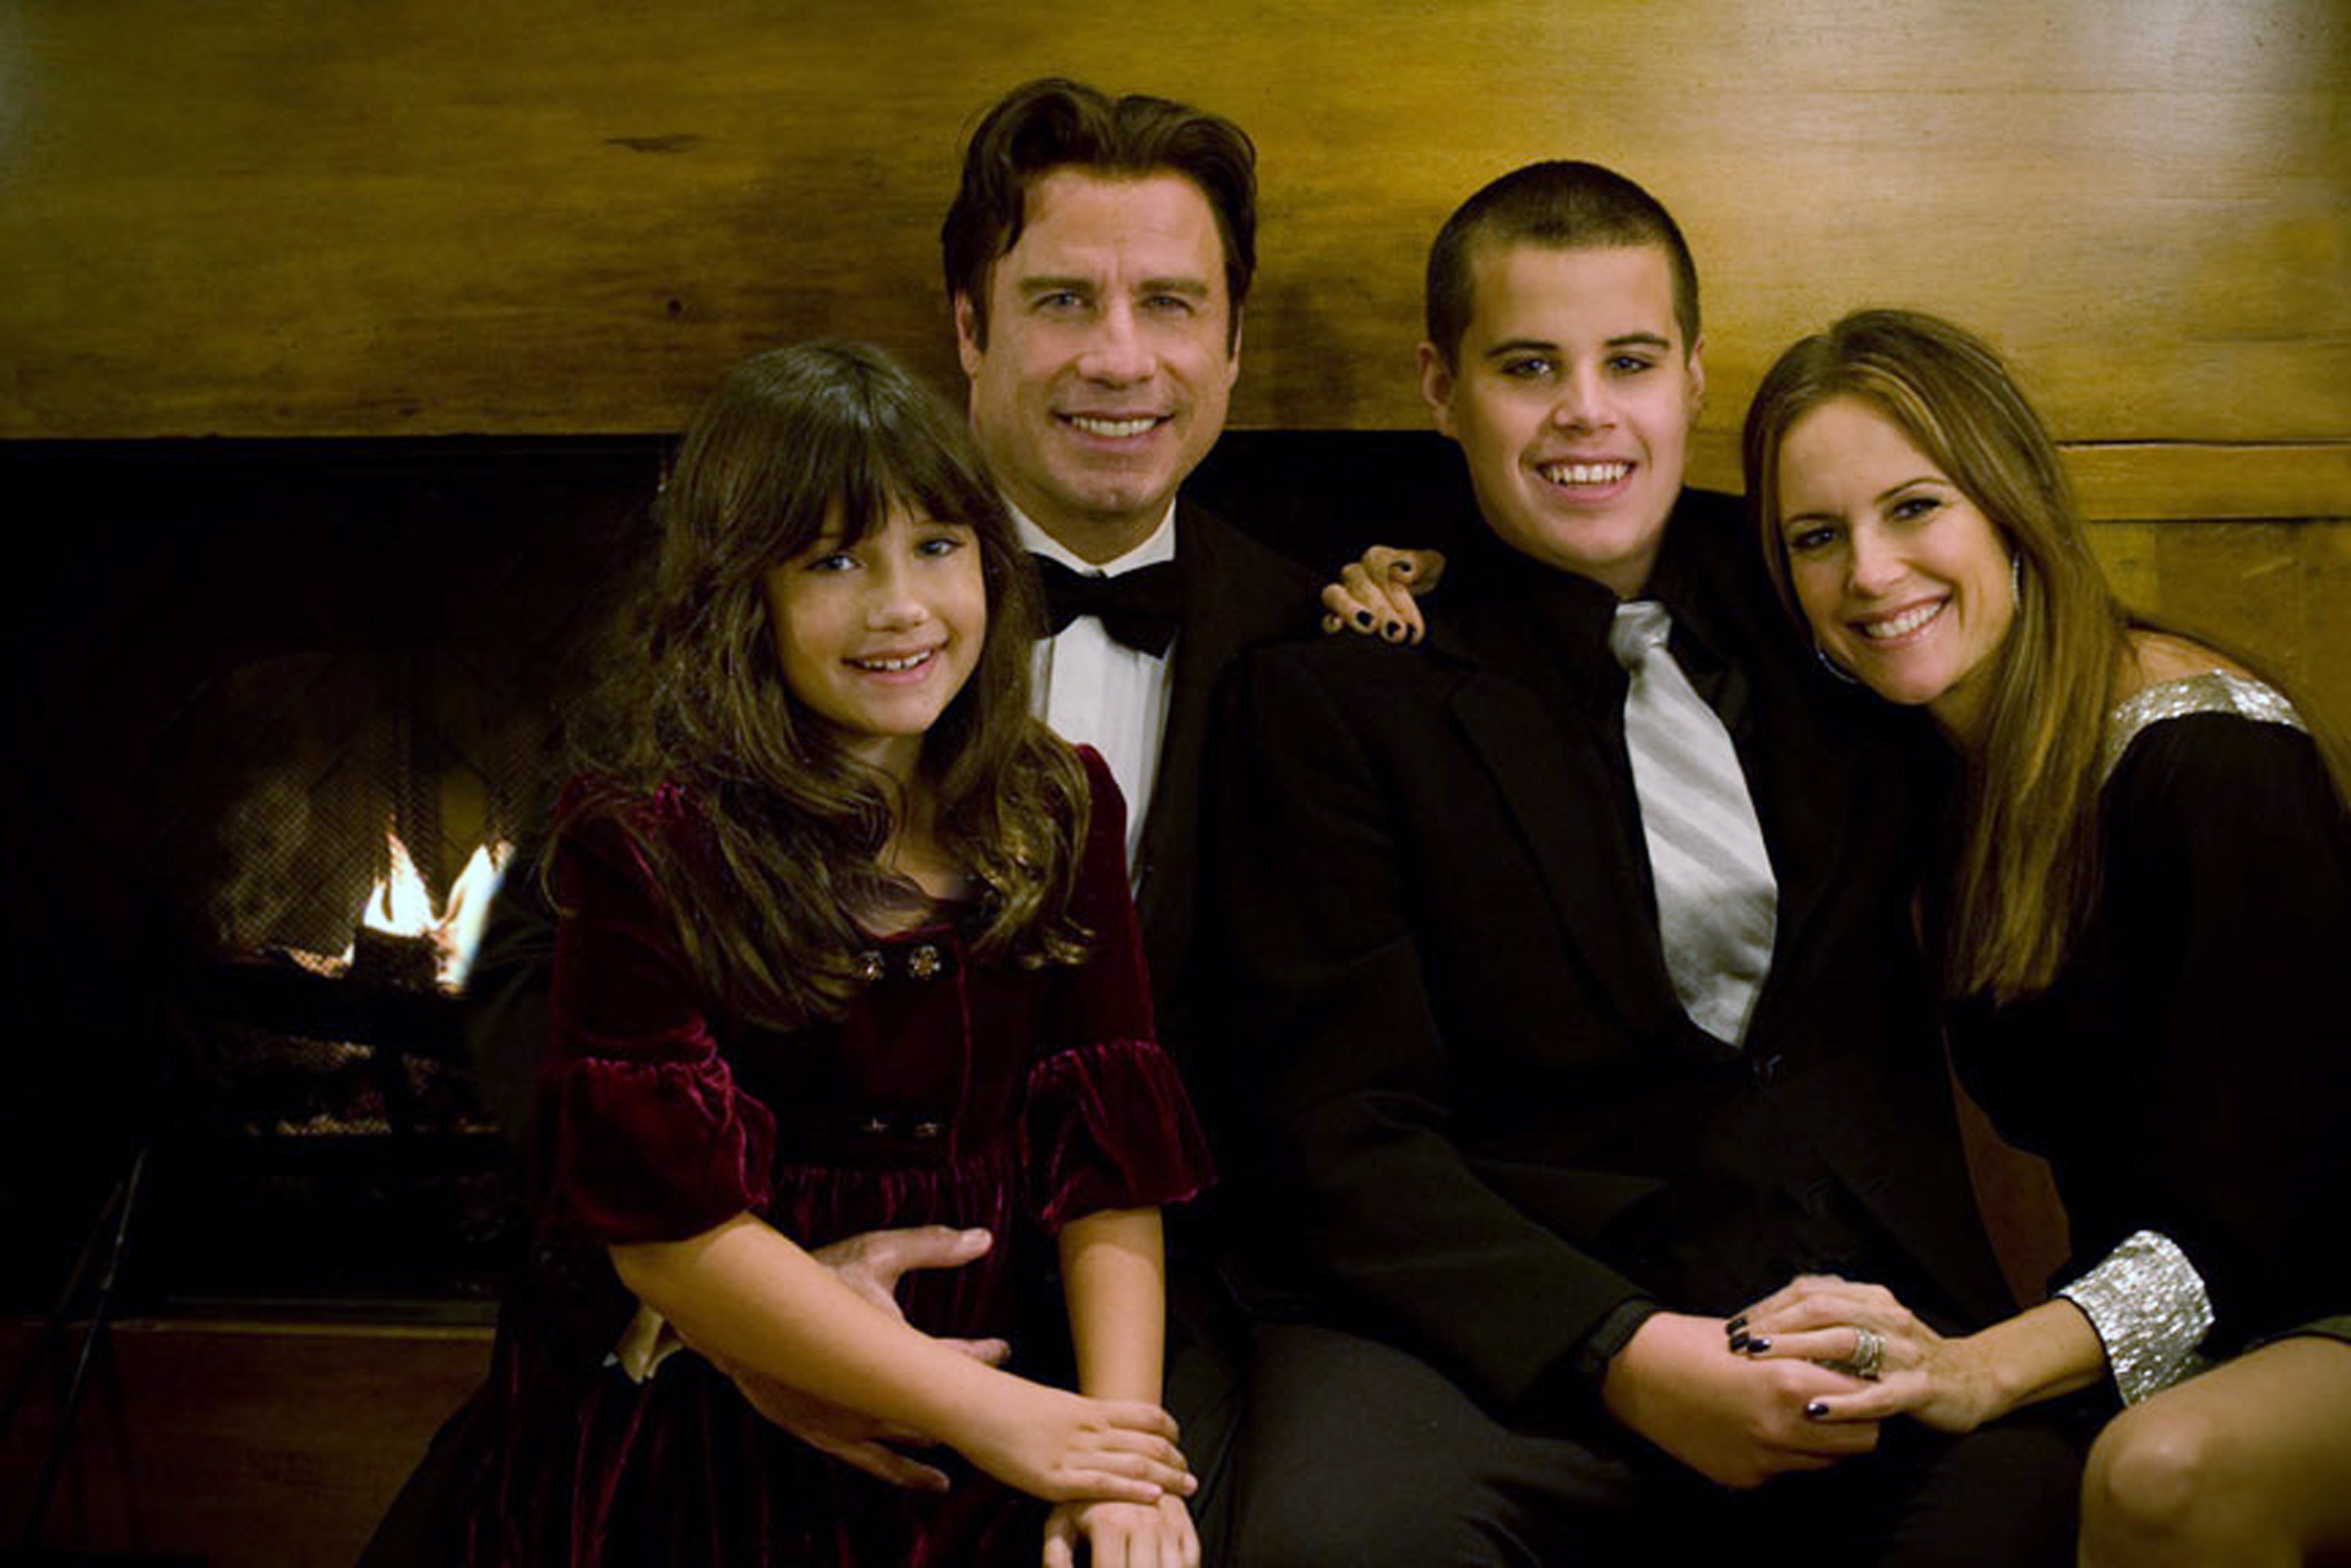 John Travolta with late son Jett, wife Kelly Preson, and daughter Ella in undated family portrait | Source: Getty Images